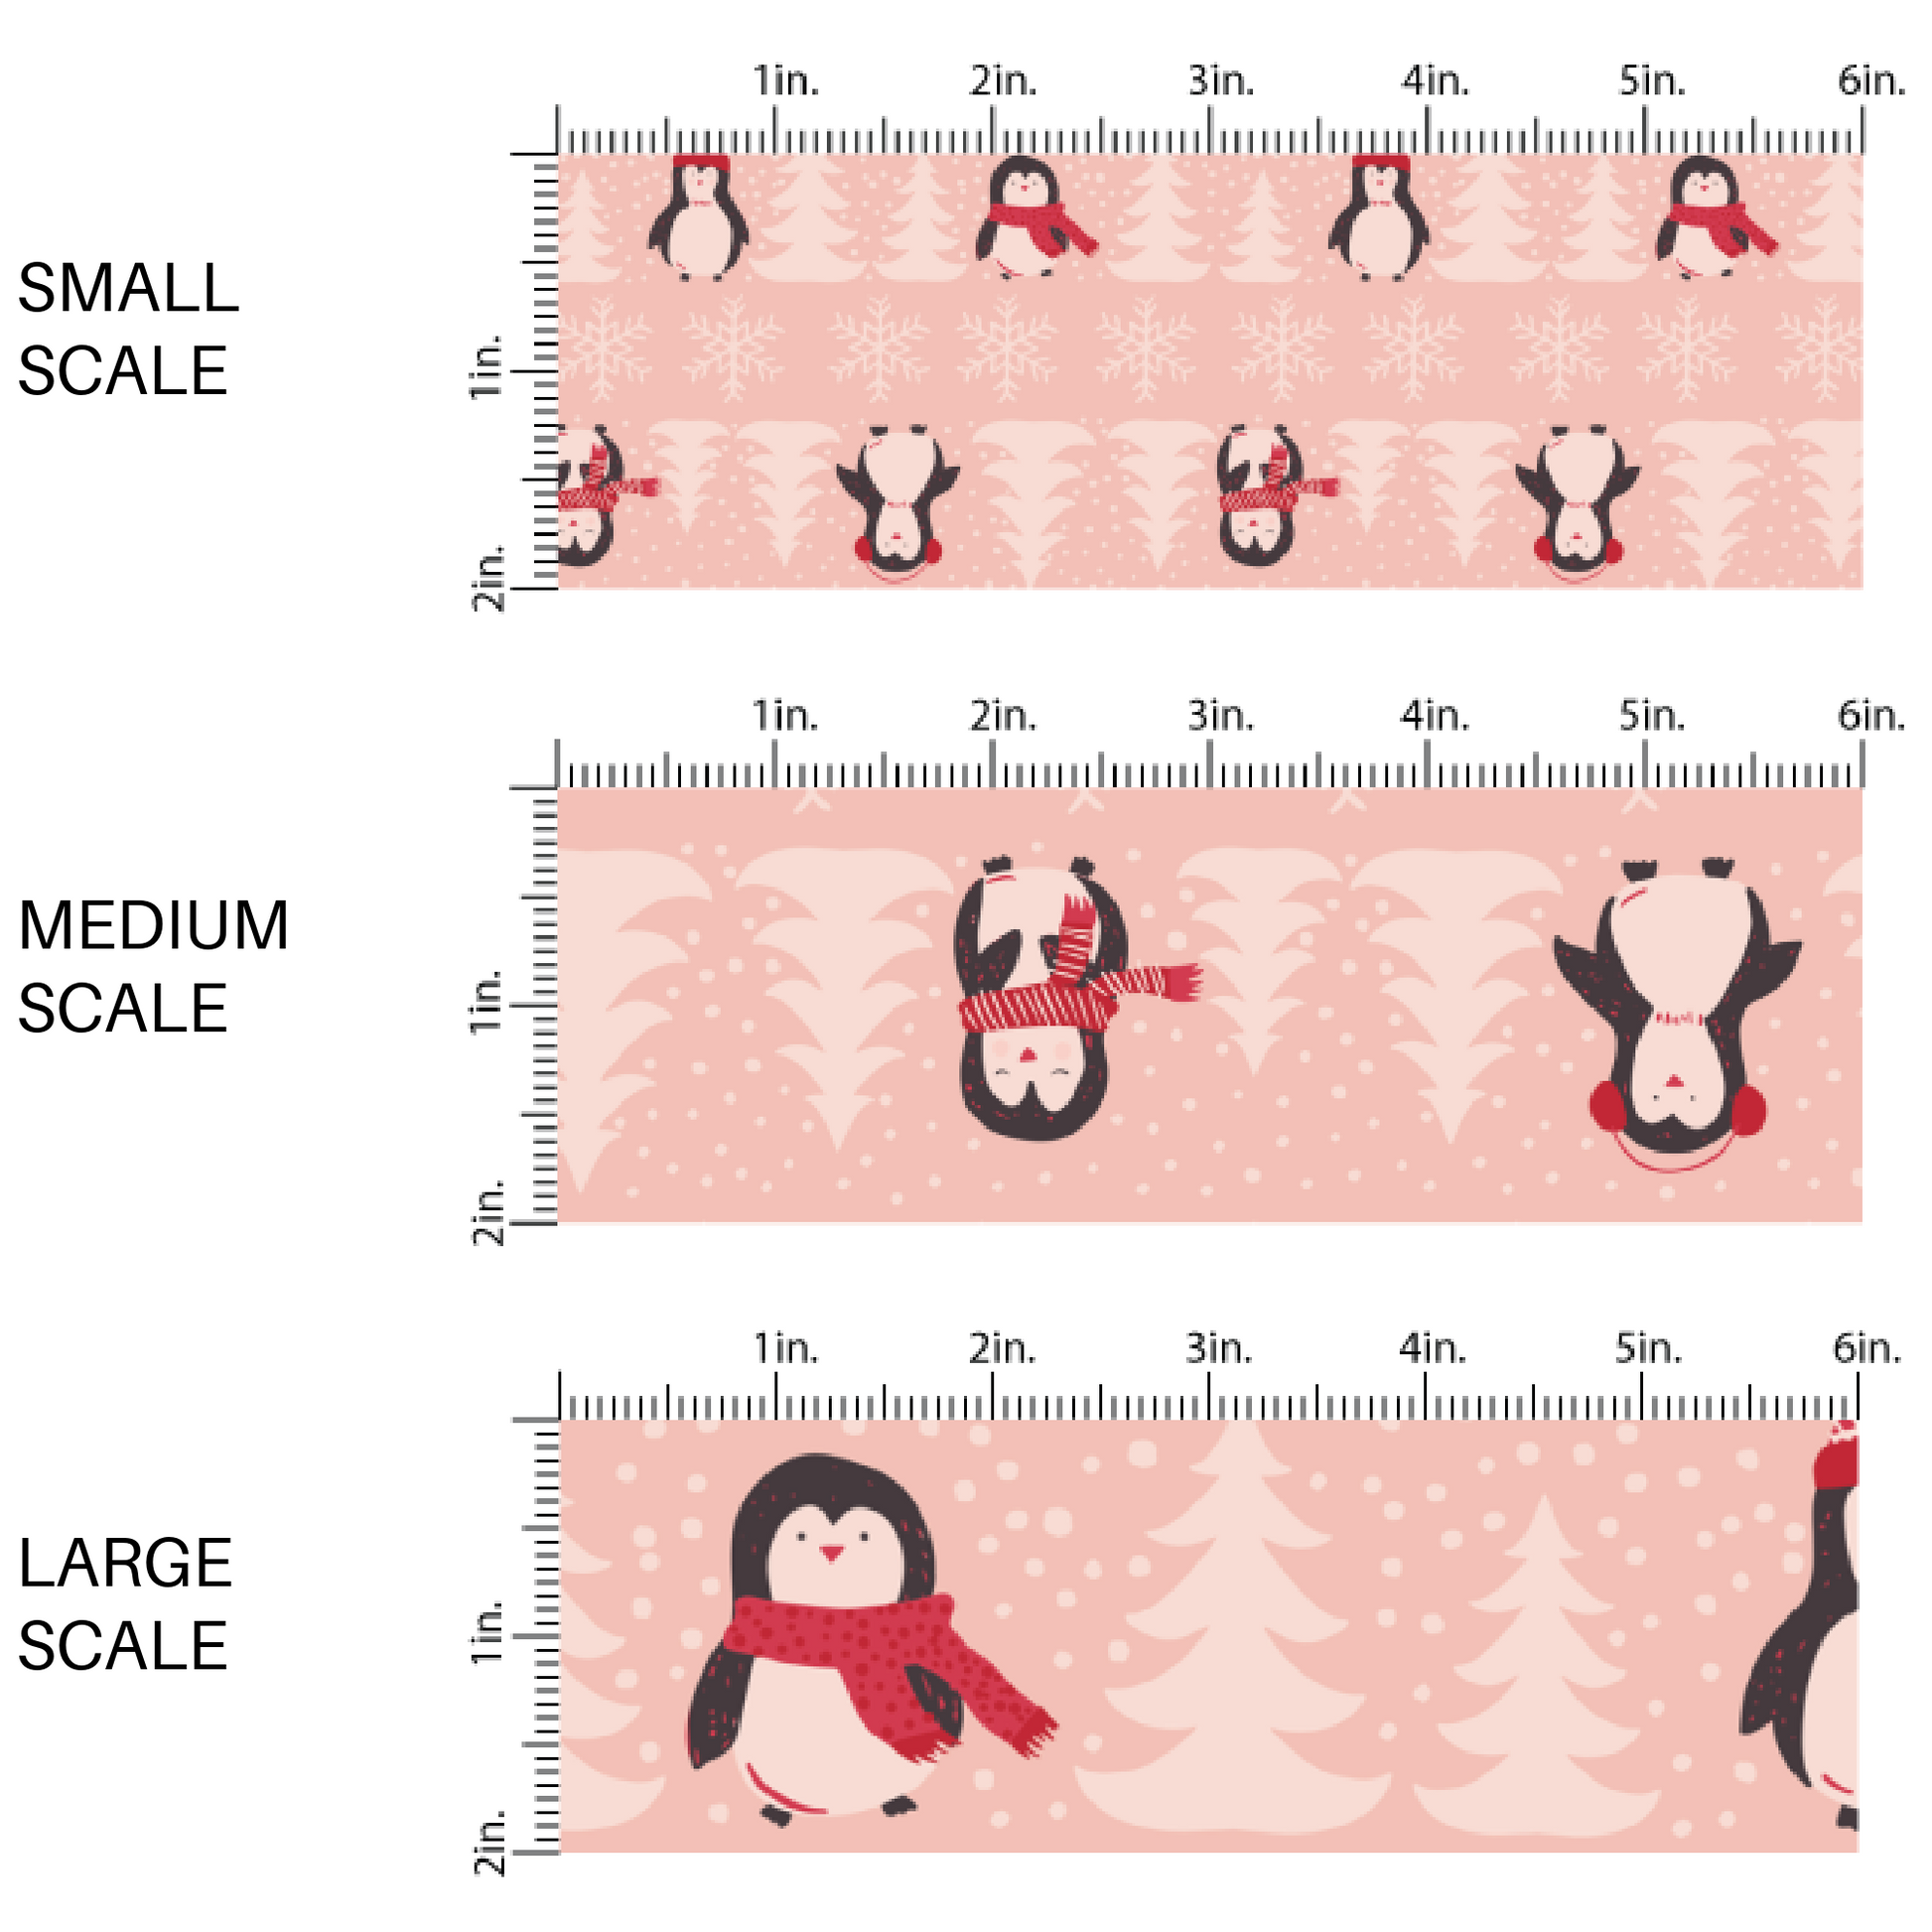 This scale chart of small scale, medium scale, and large scale of these holiday pattern themed fabric by the yard features penguins with scarves and hats surrounded by pine trees and snowflakes on pink. This fun Christmas fabric can be used for all your sewing and crafting needs!